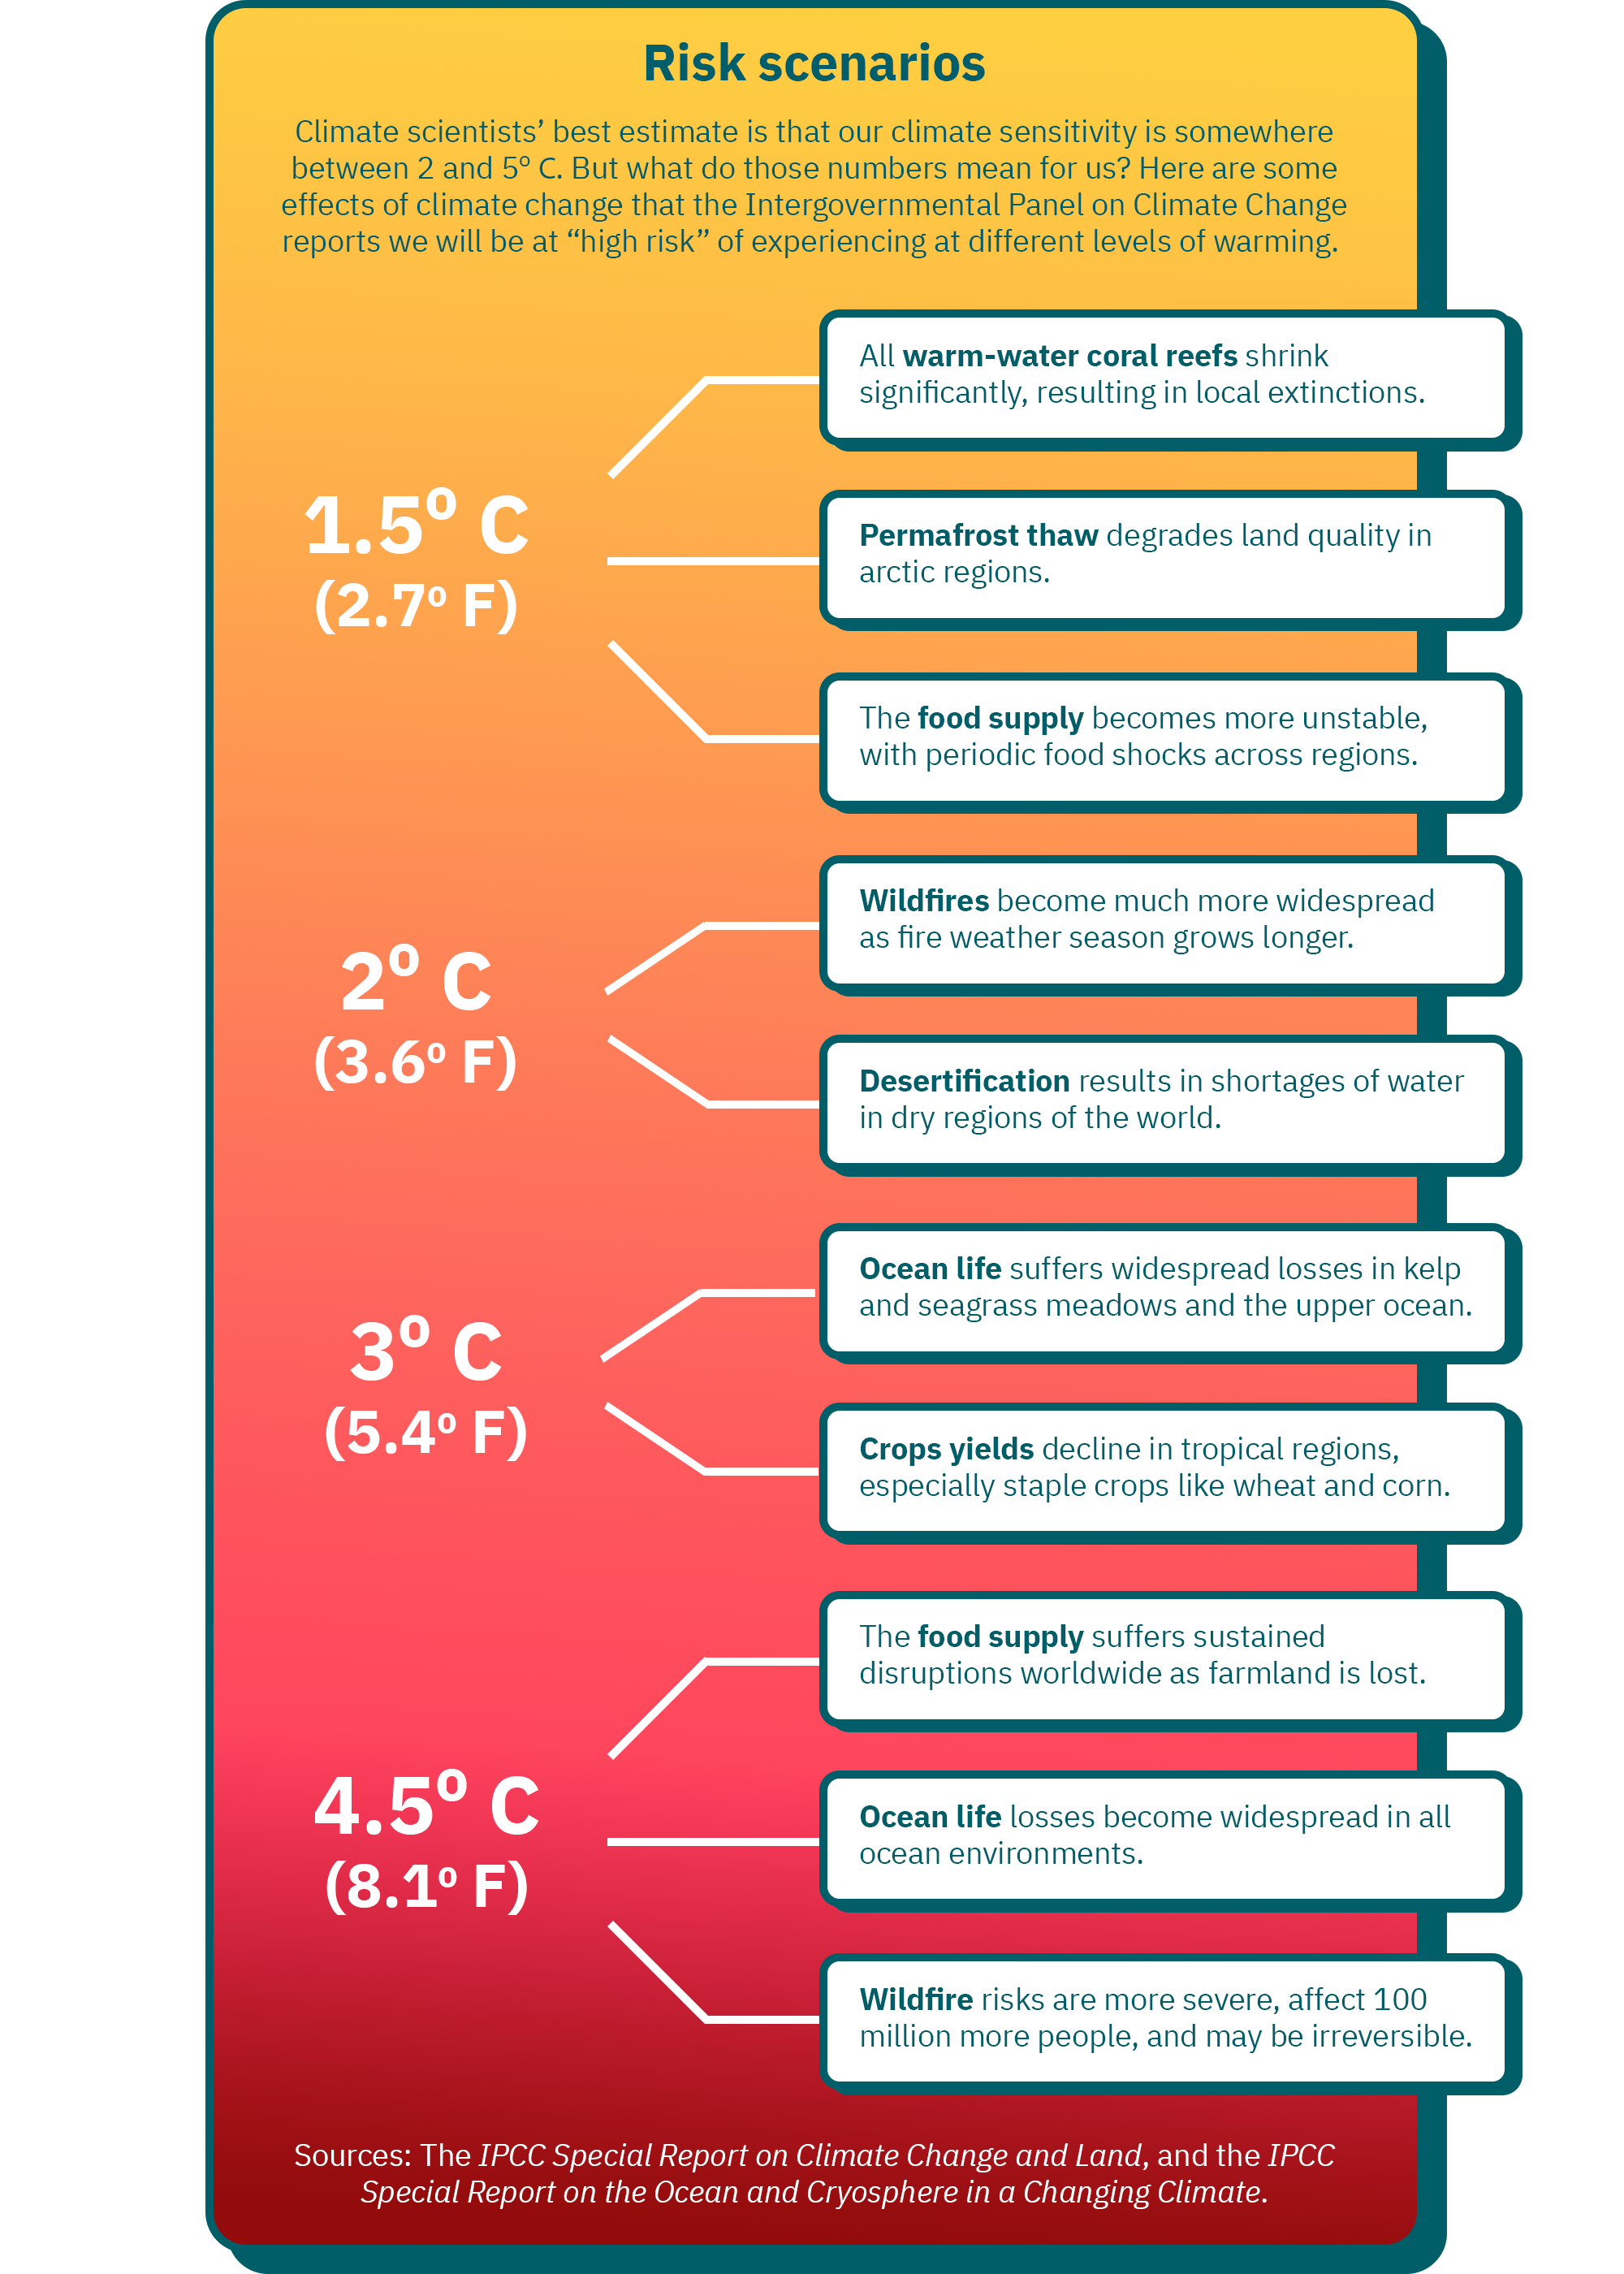 What Is Temperature? Definition in Science